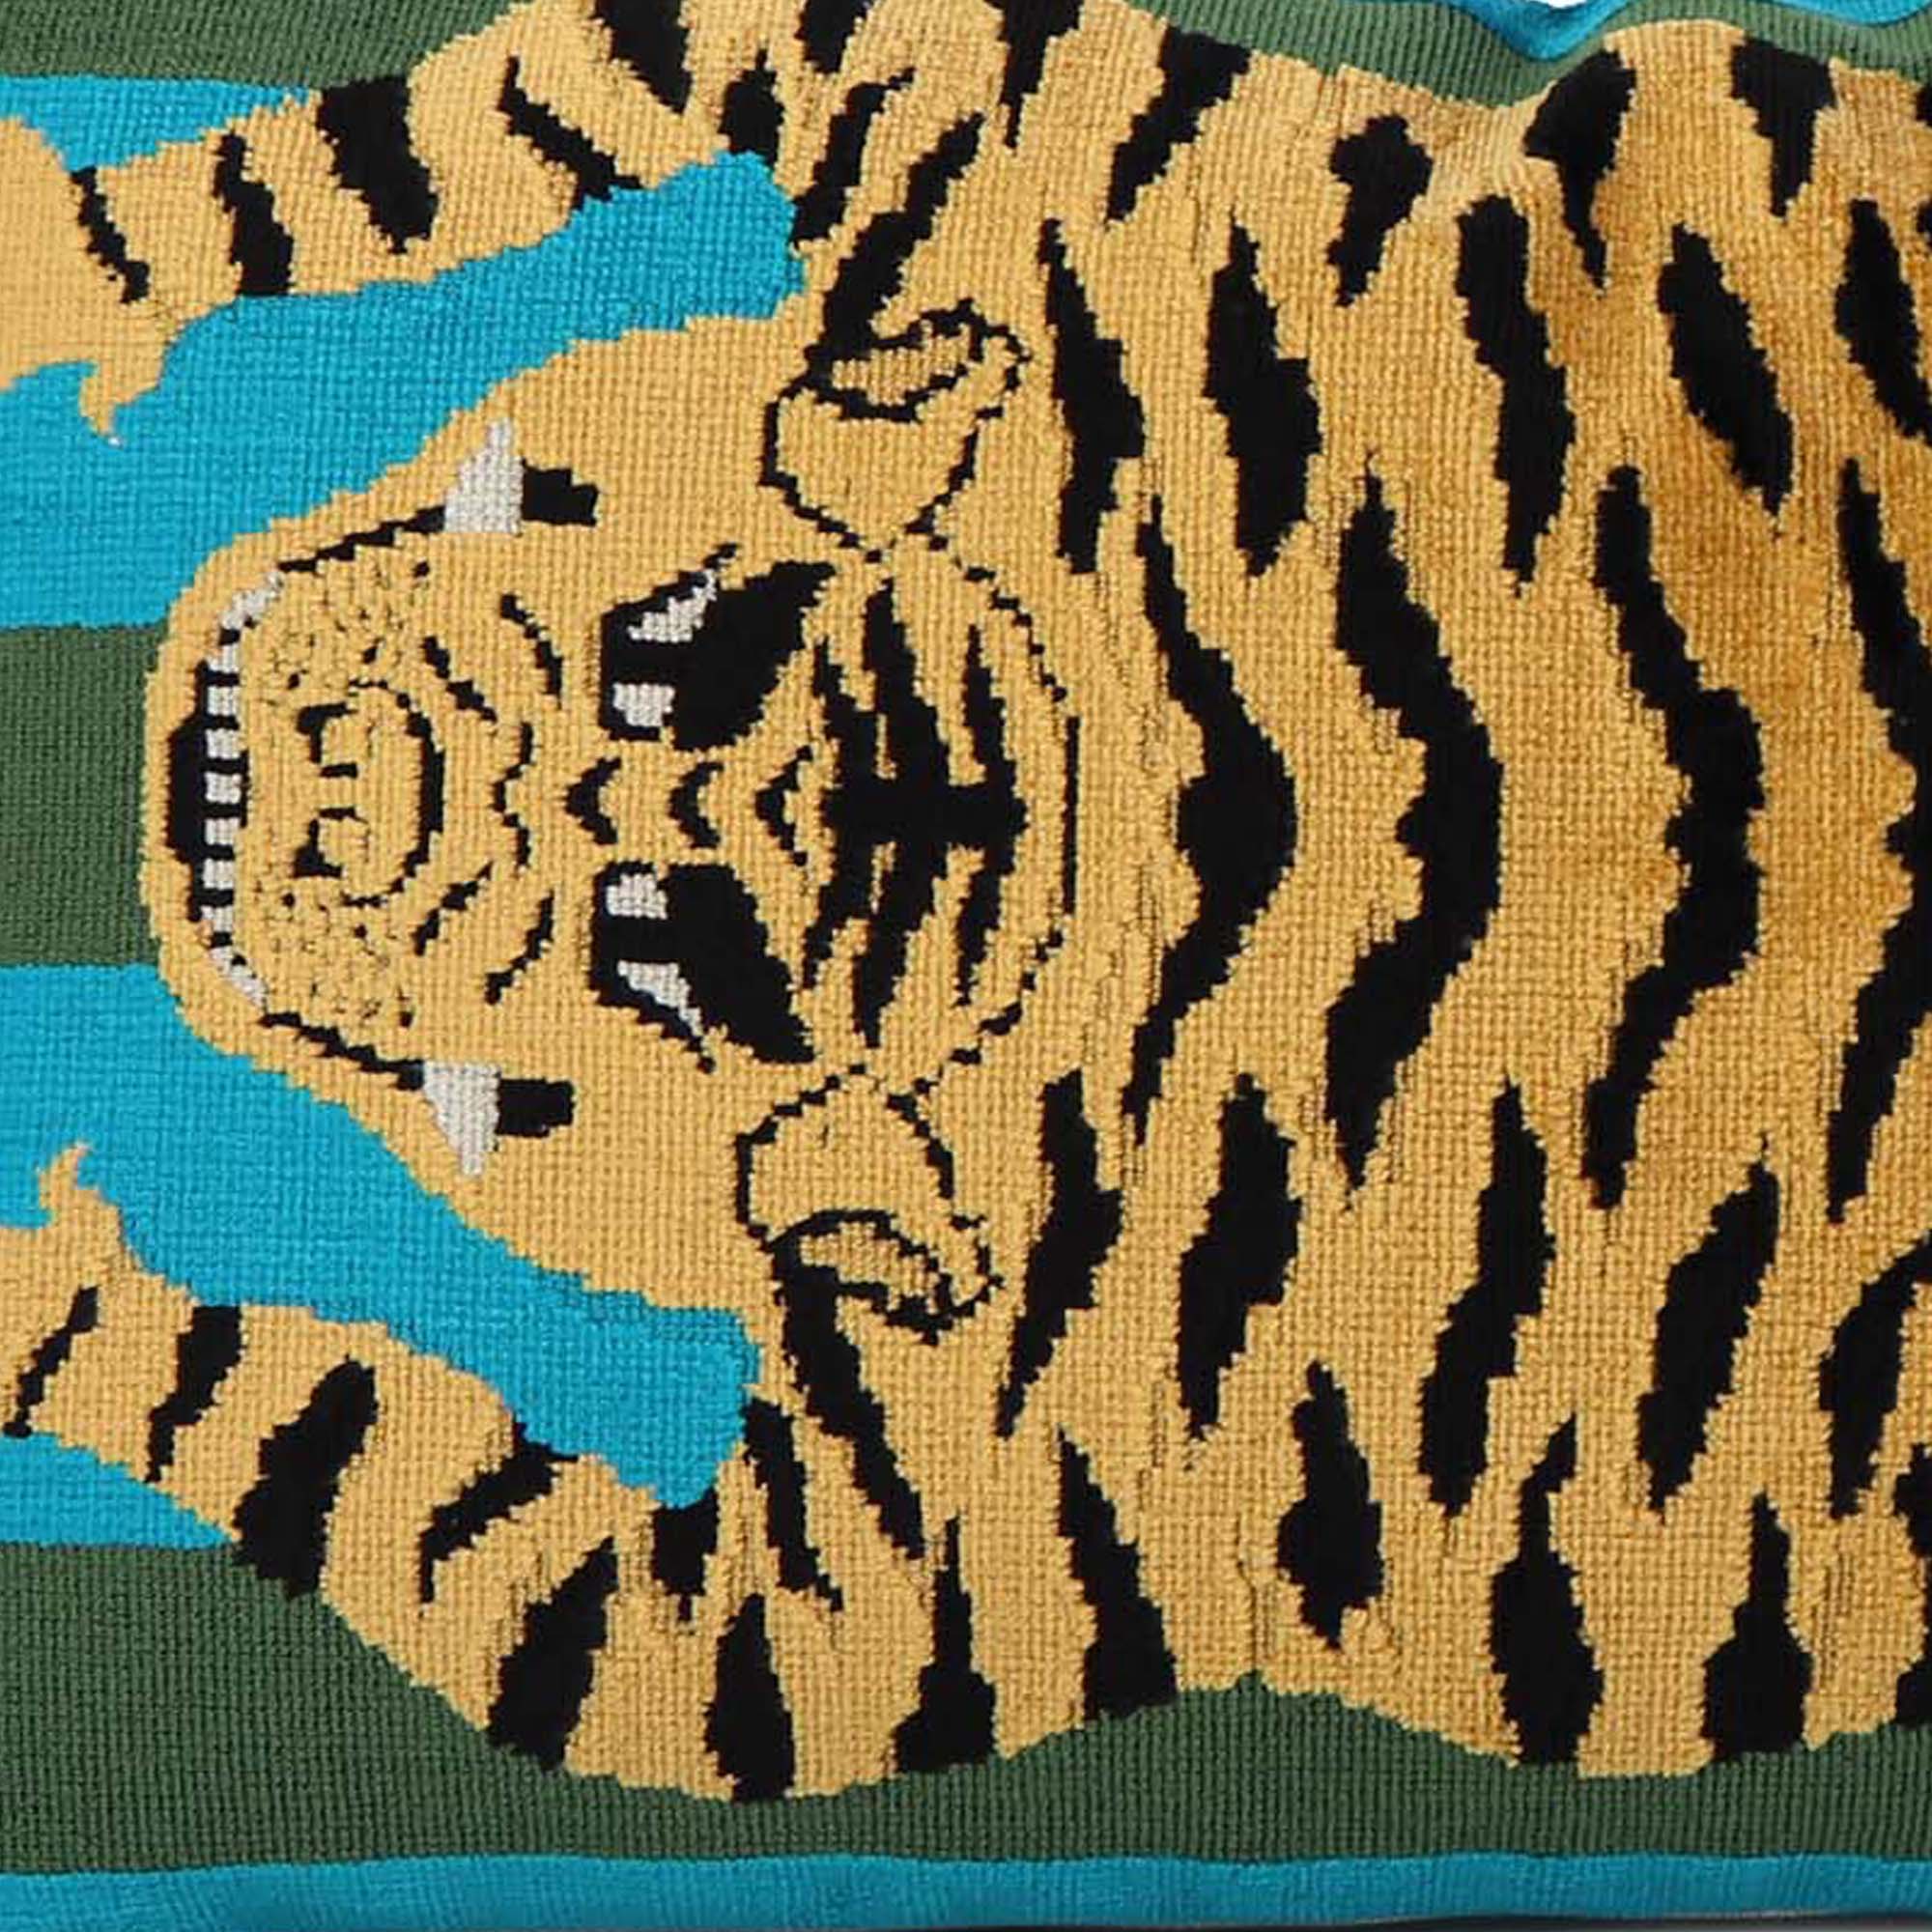 Jokhang Tiger Velvet Peacock & Olive / 4x4 inch Fabric Swatch